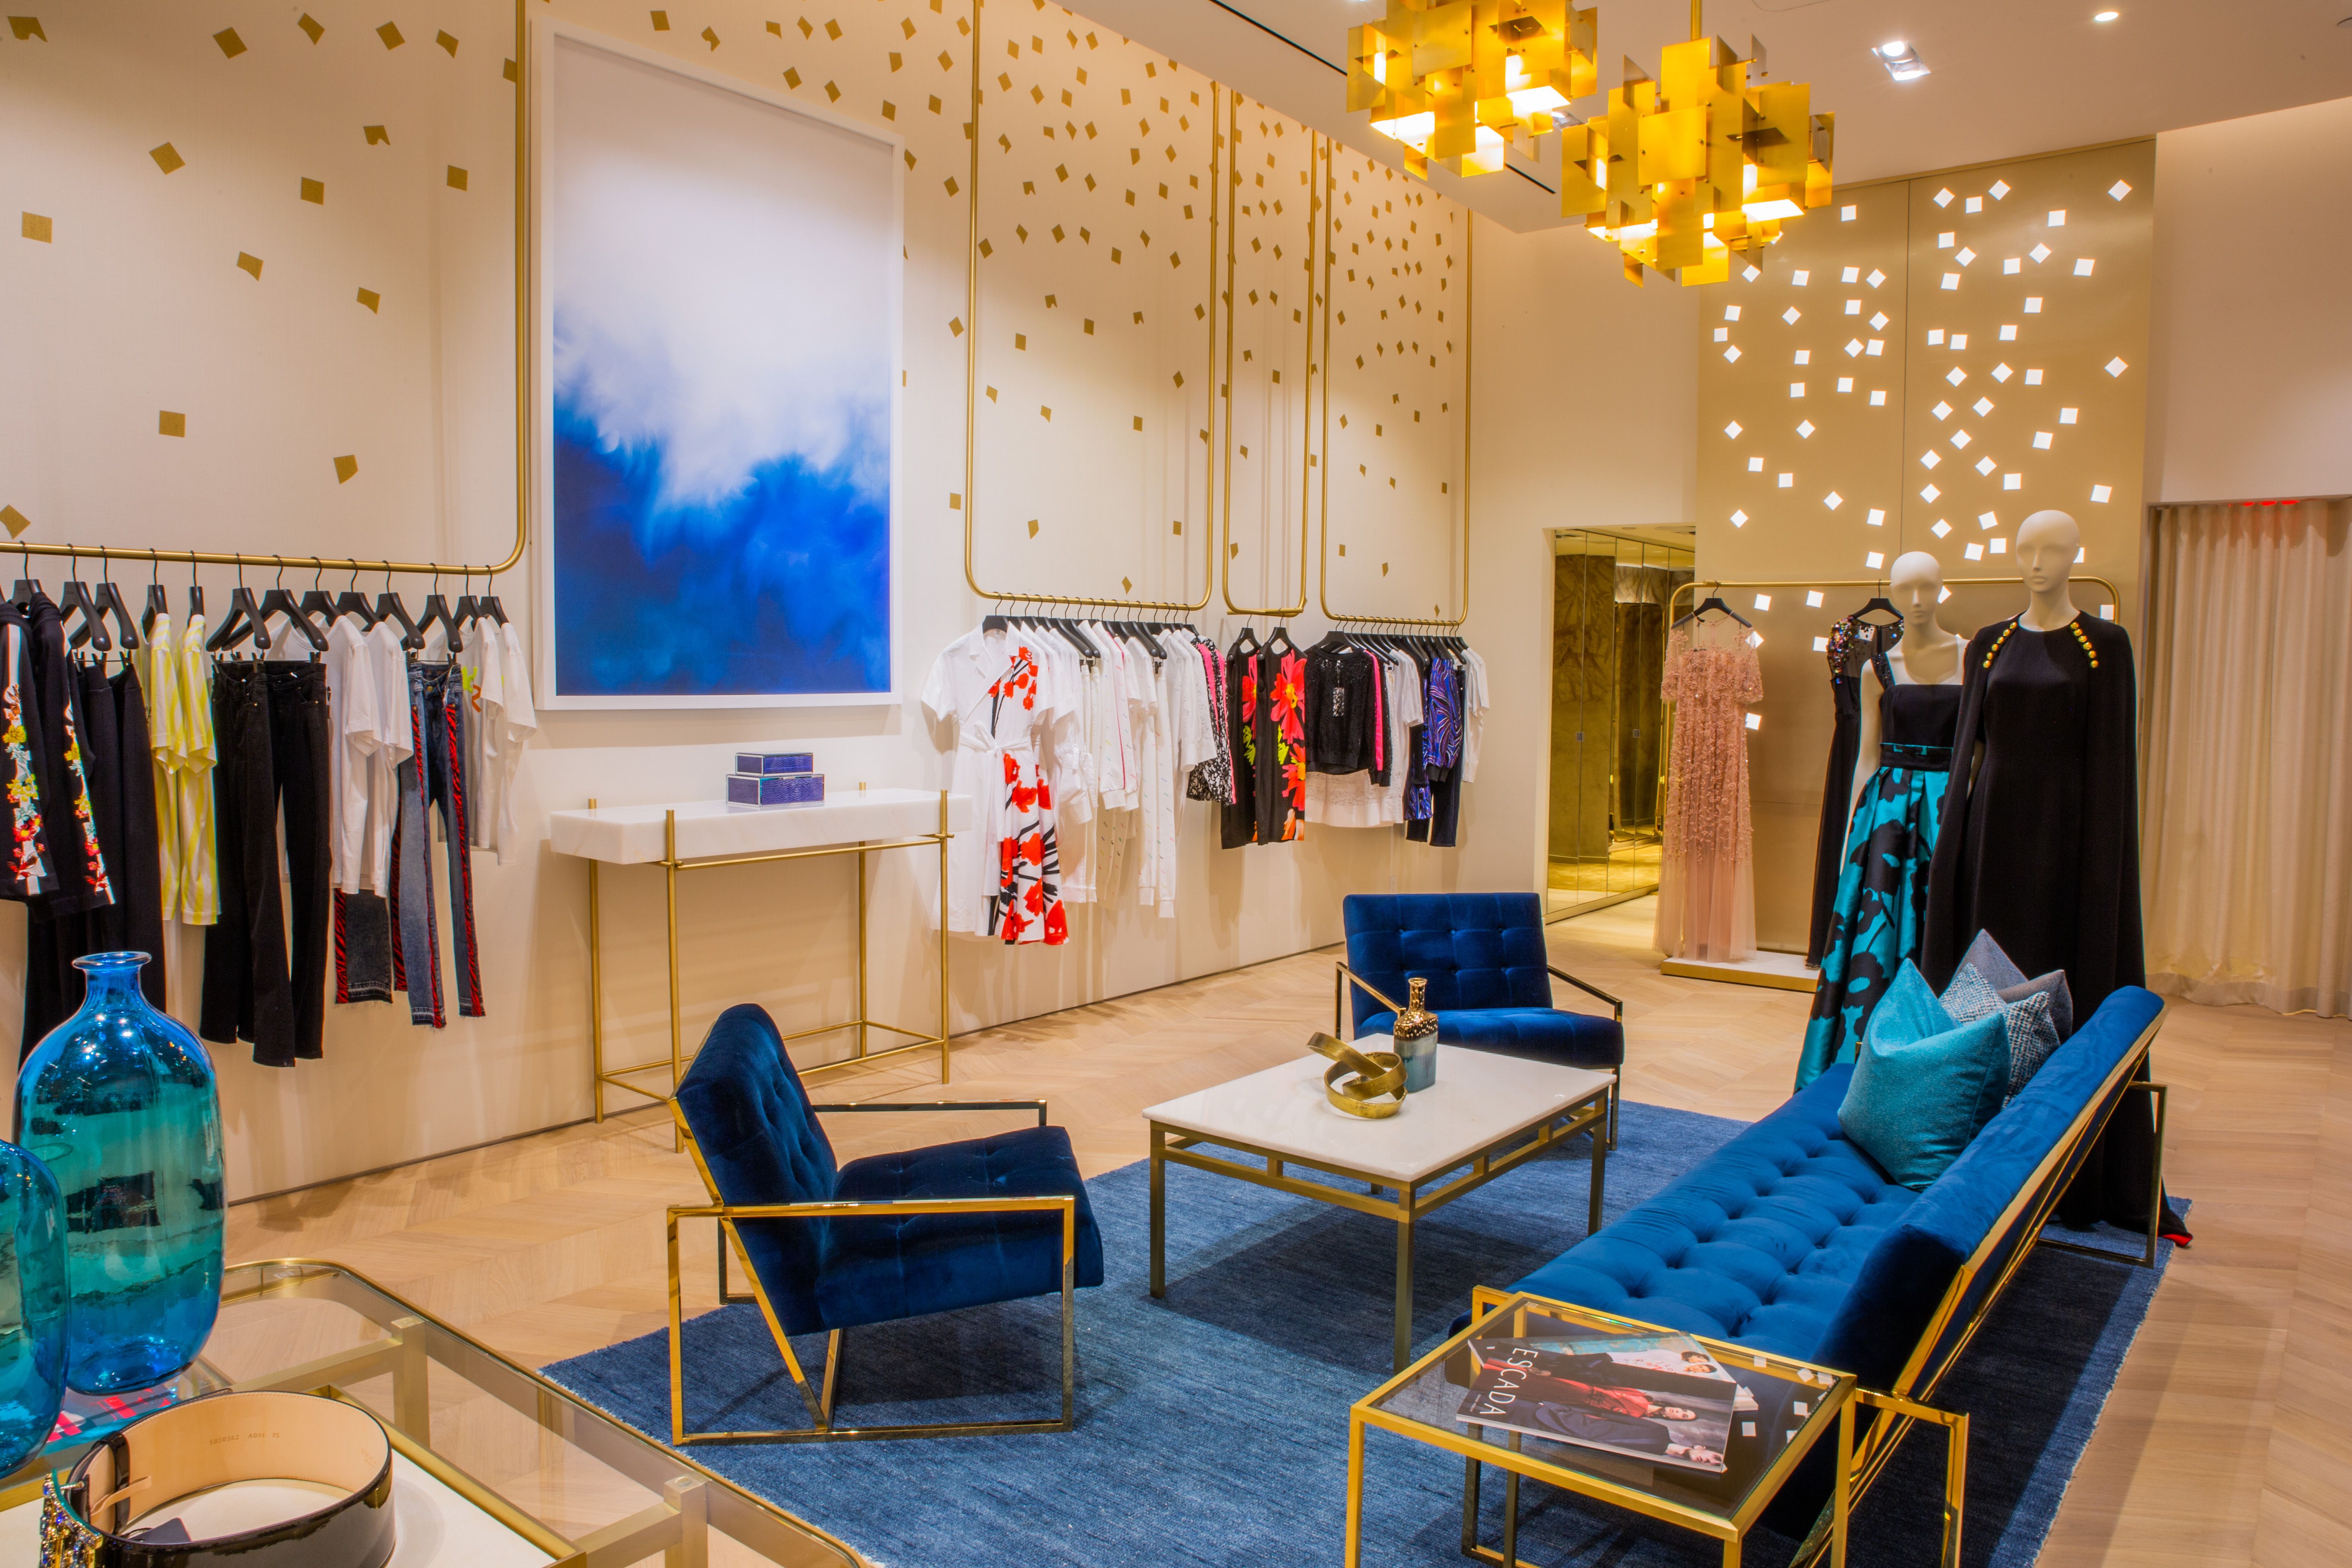 ESCADA Bal Harbour takes its cues from ancient Japanese artistry, with hand-painted walls with gold leaves and Art Deco-inspired furnishings.